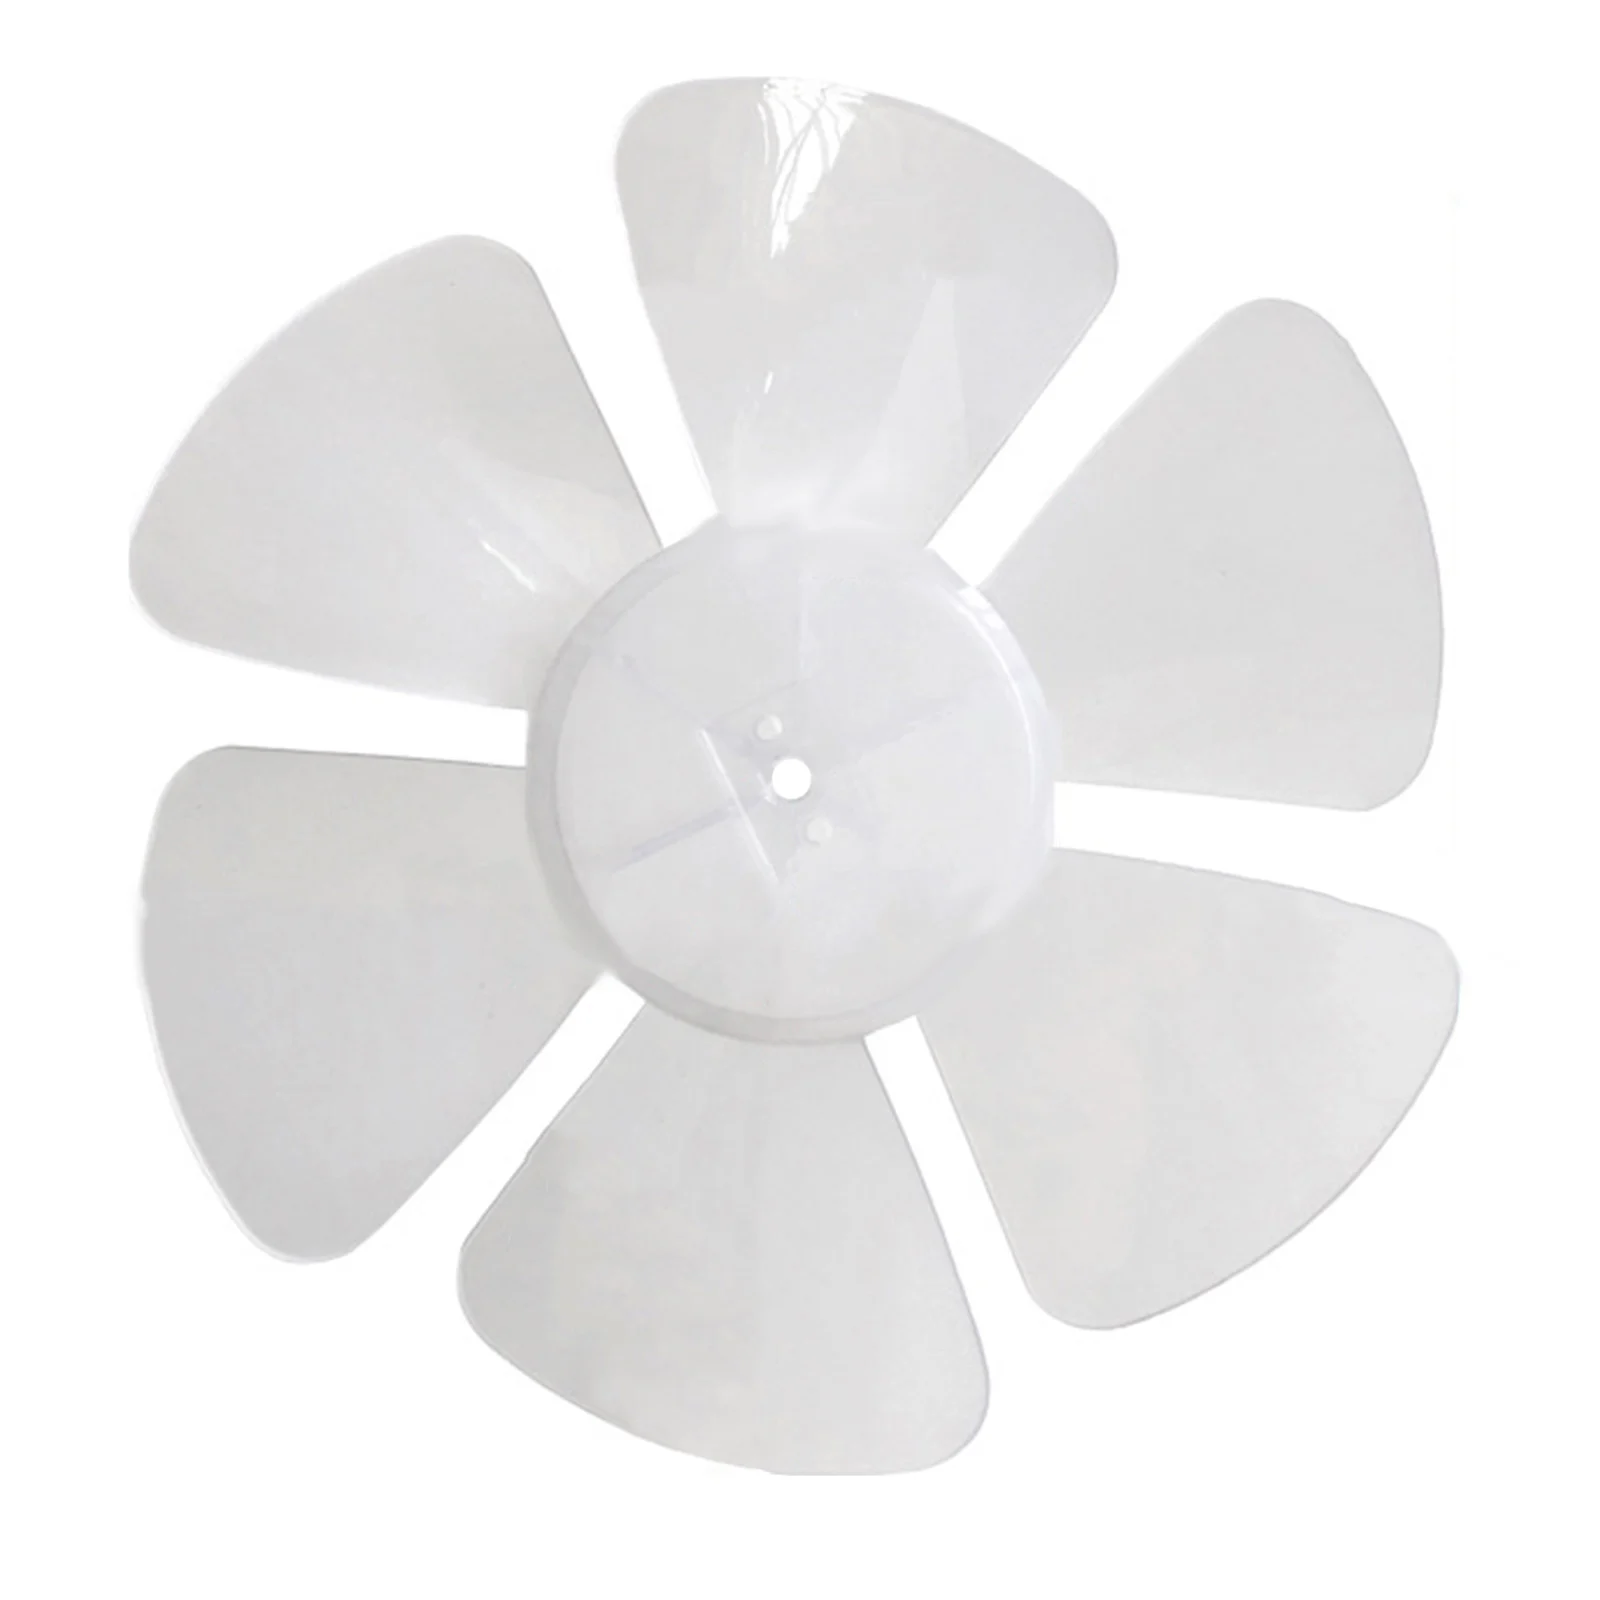 

Optimal Performance 10 inch Household Plastic Six Blade Floor Fan Replacement Parts for Table and Standing Fans